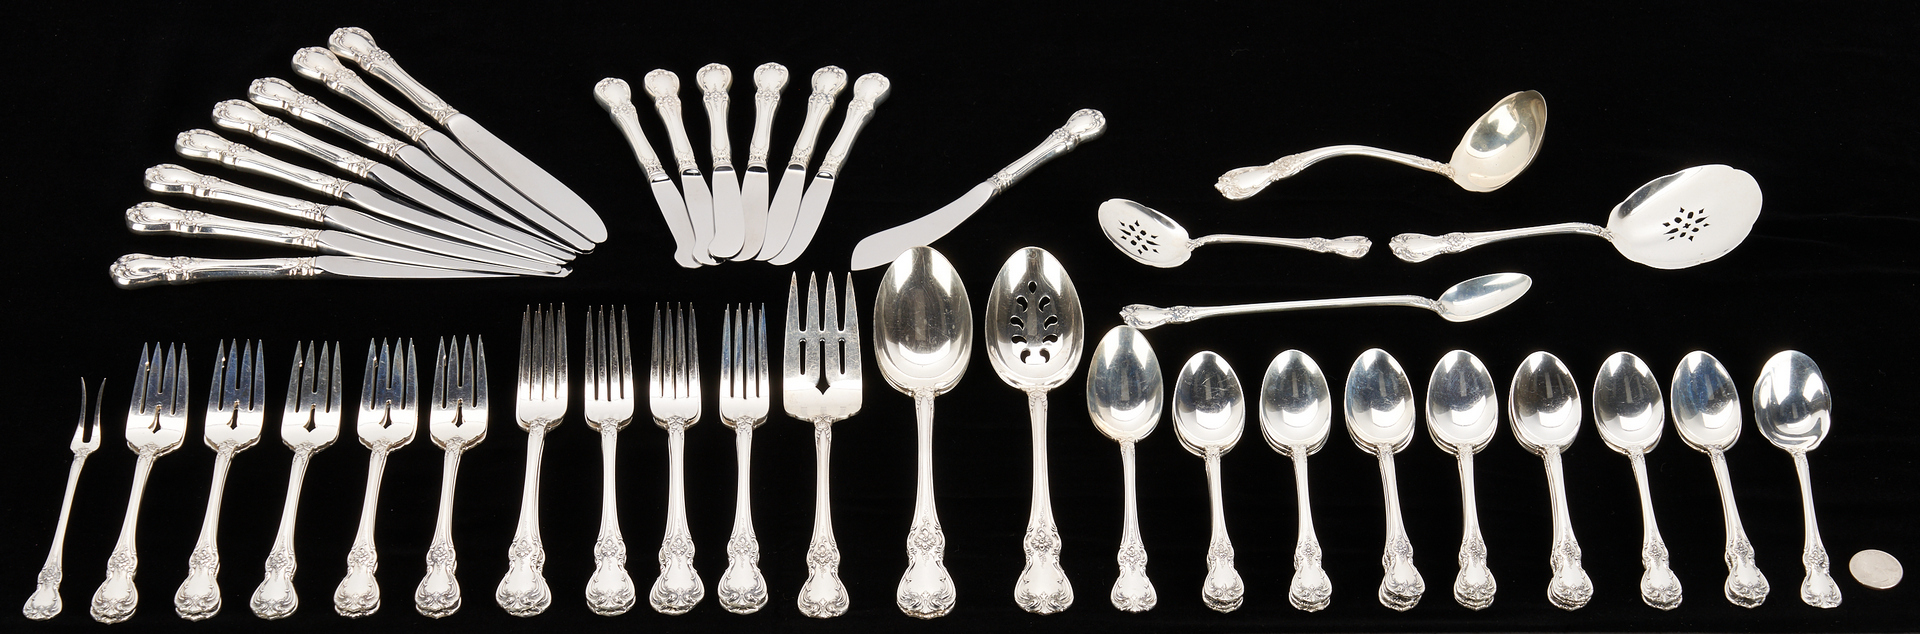 Lot 37: 63 Pcs. Towle Old Master Sterling Silver Flatware